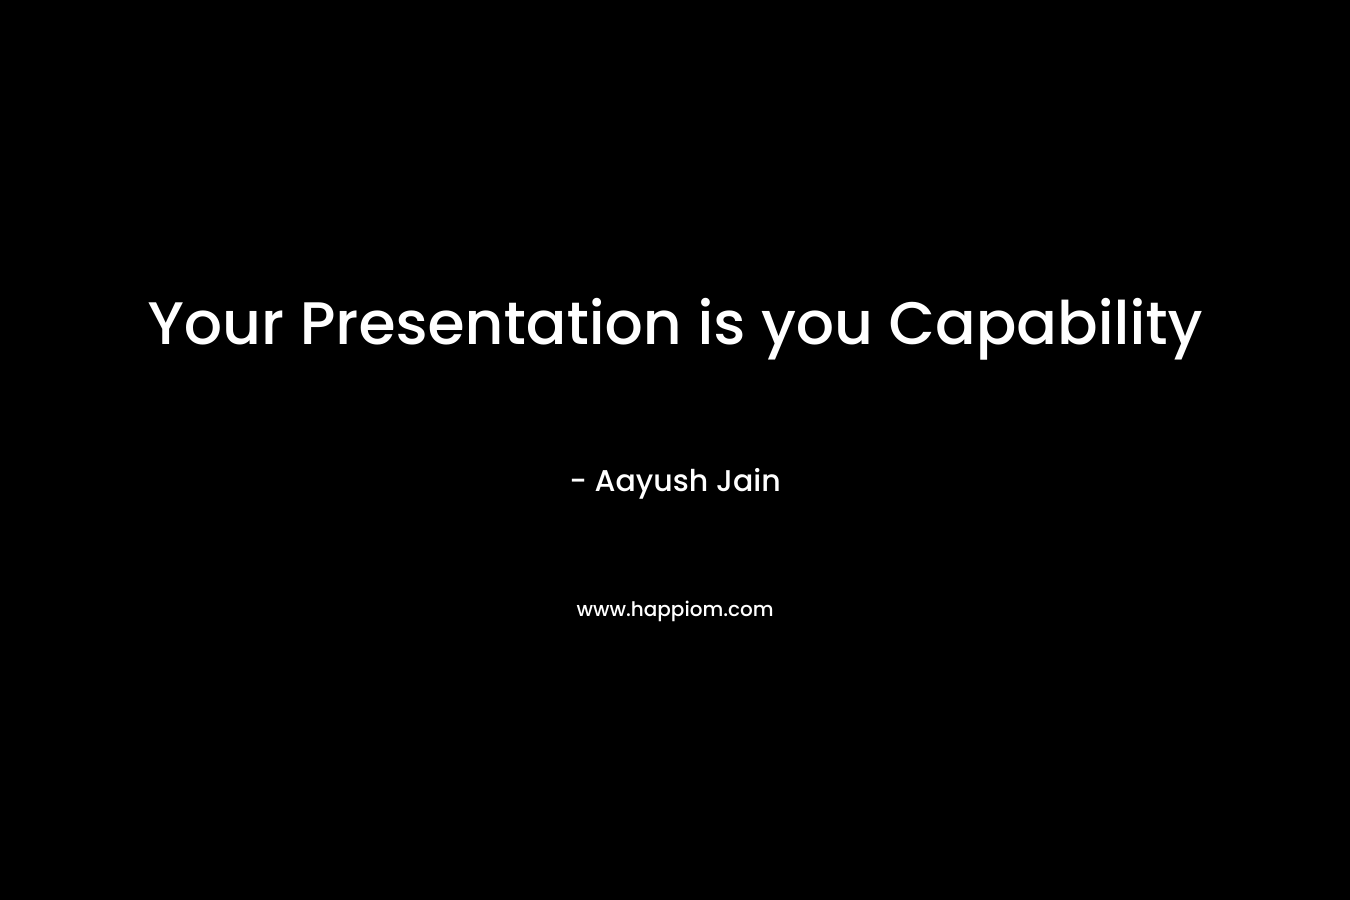 Your Presentation is you Capability